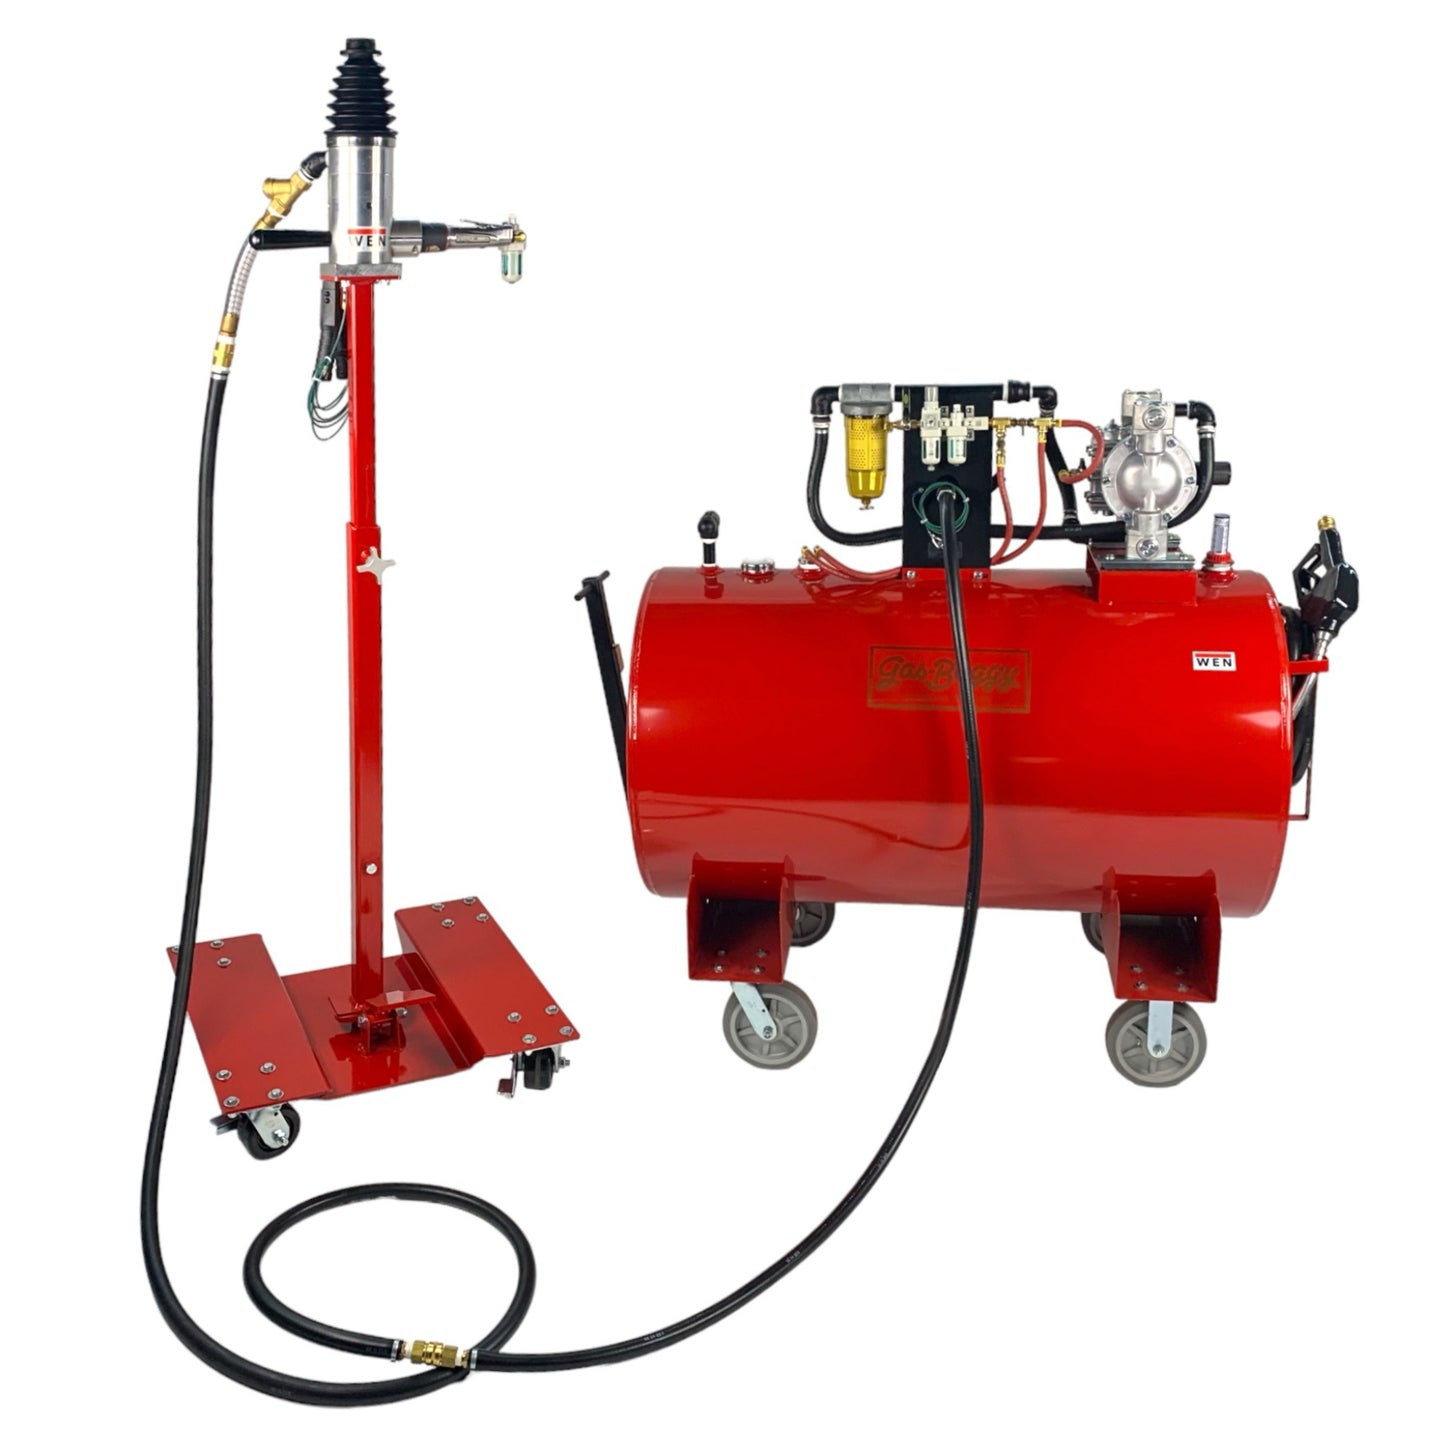 TD700 Fuel Tank Drill System (For use with a WEN Gas Buggy®)